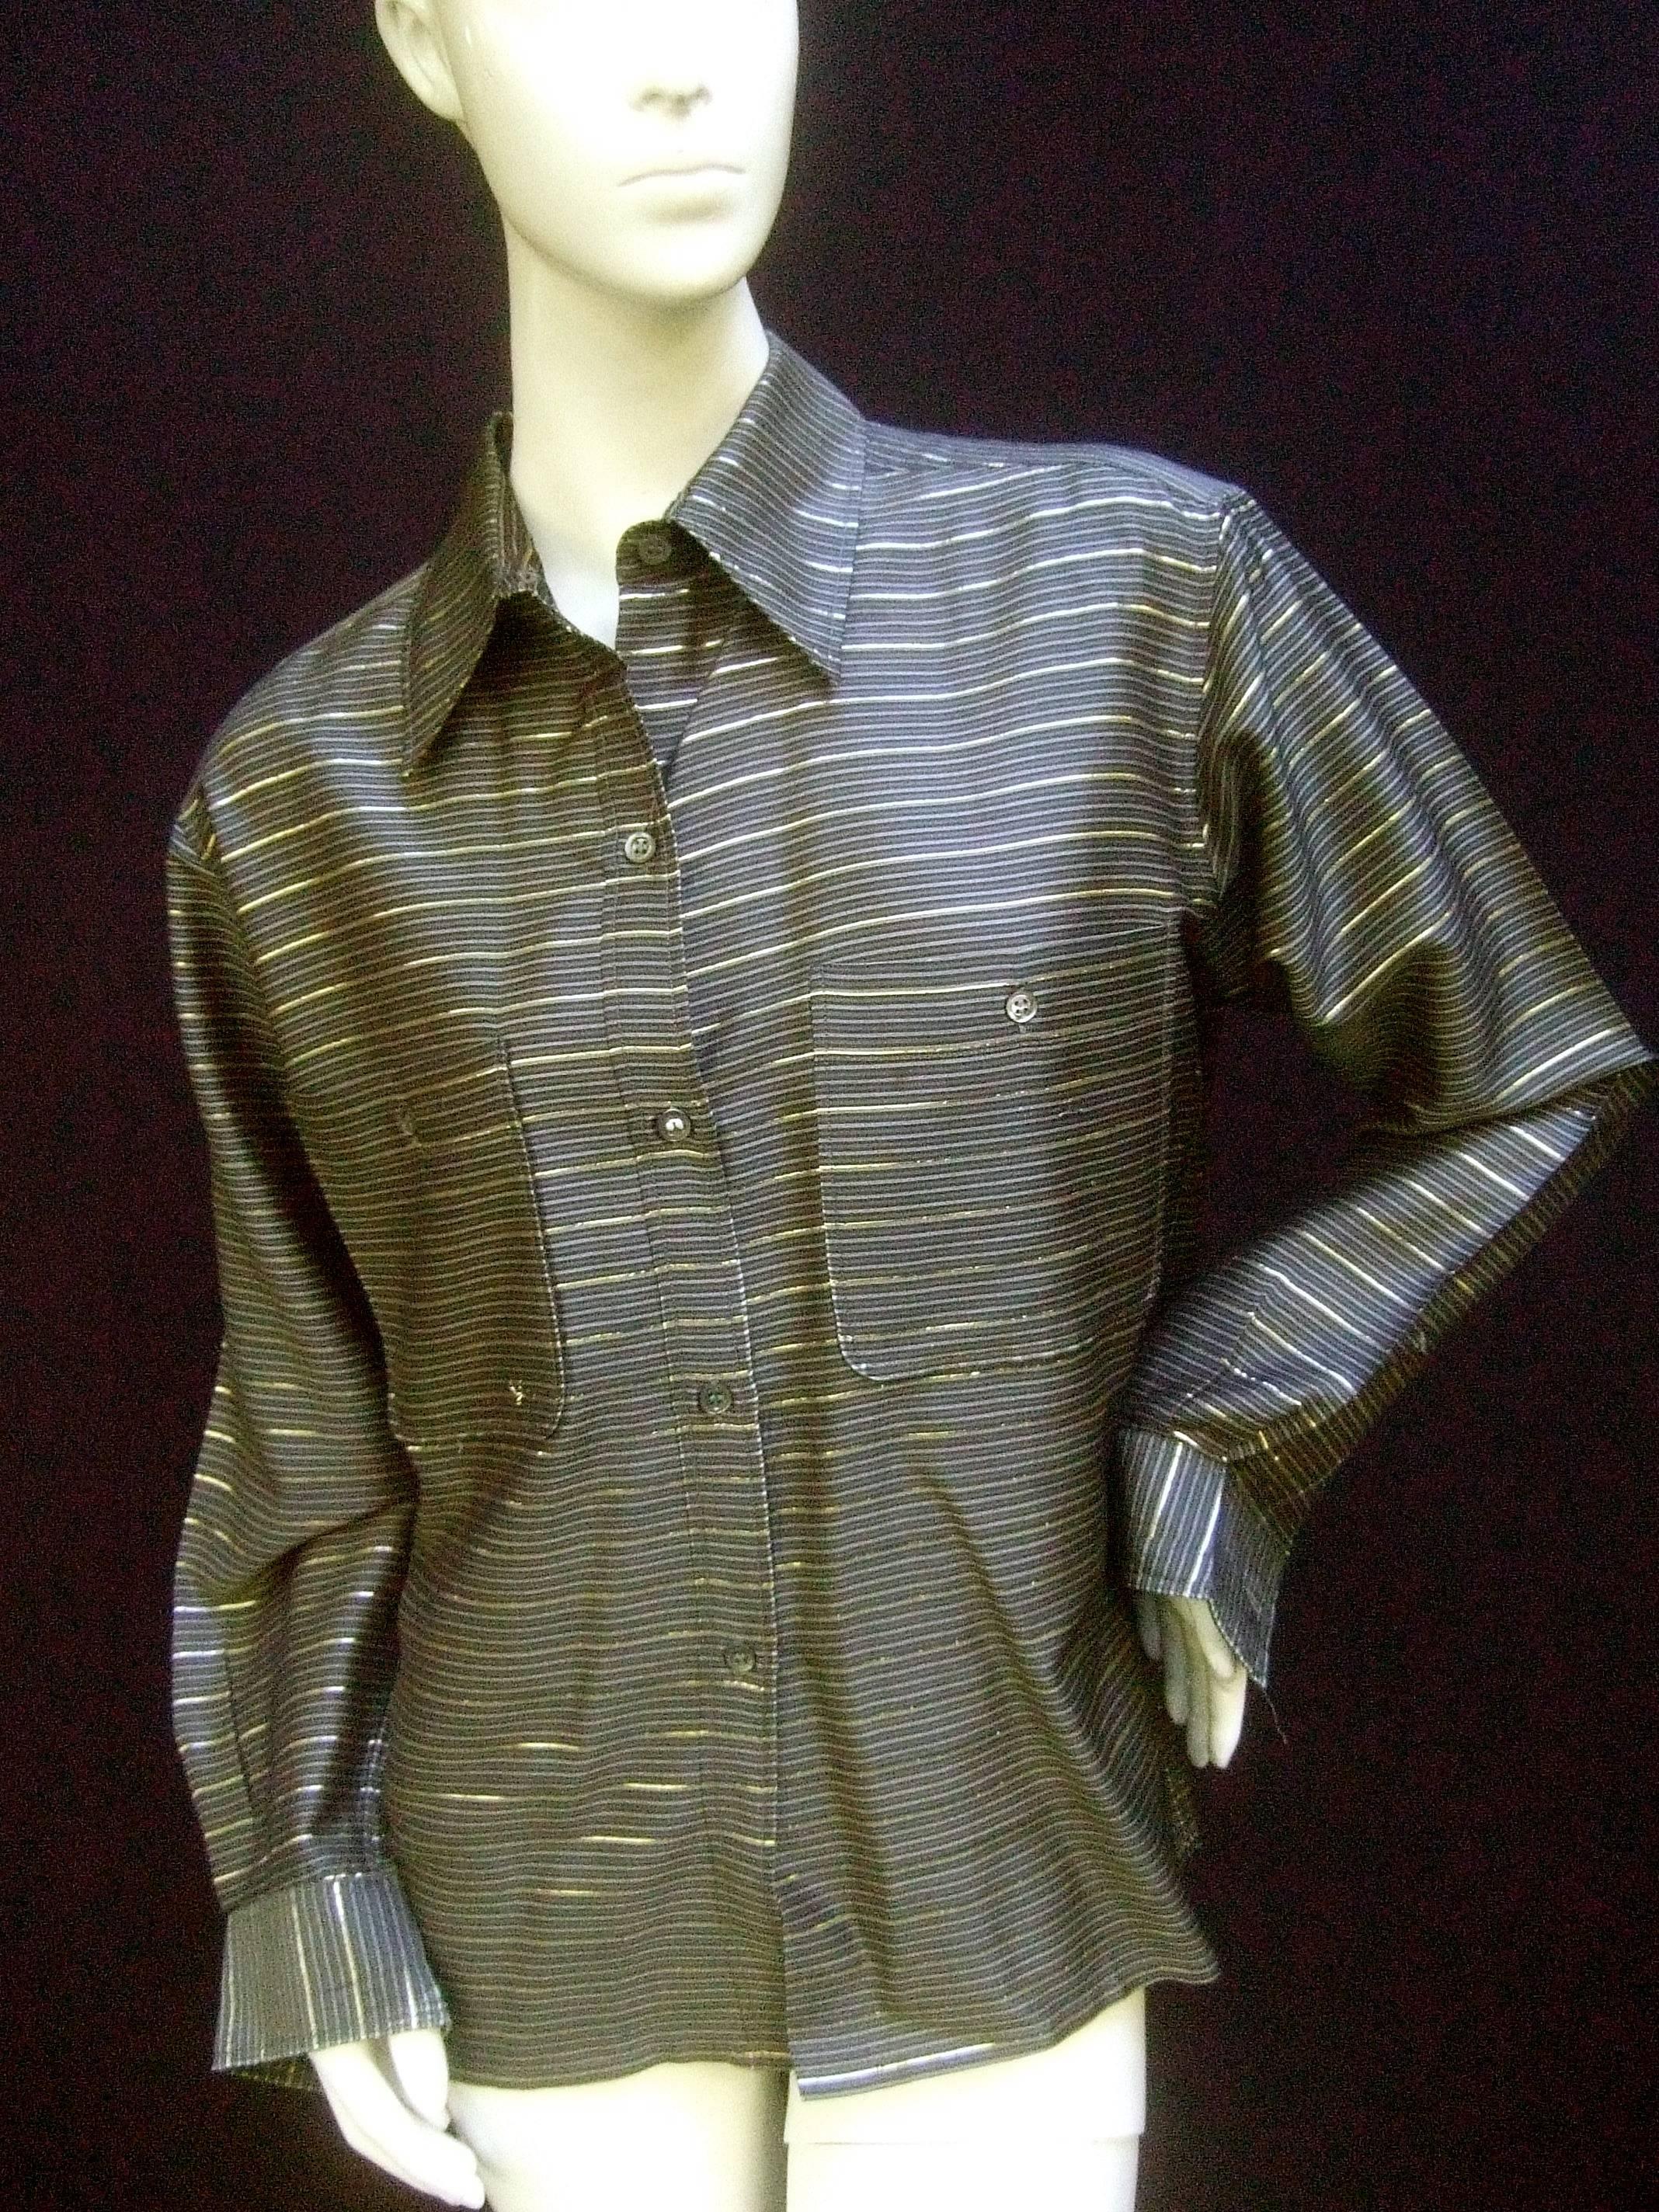 Saint Laurent Rive Gauche gold metallic striped gray blouse c 1970s
The stylish blouse is designed with a series of horizontal 
stripes in muted silvery gray colors

Juxtaposed with luminous gold metallic stripes throughout 
The shirt style blouse